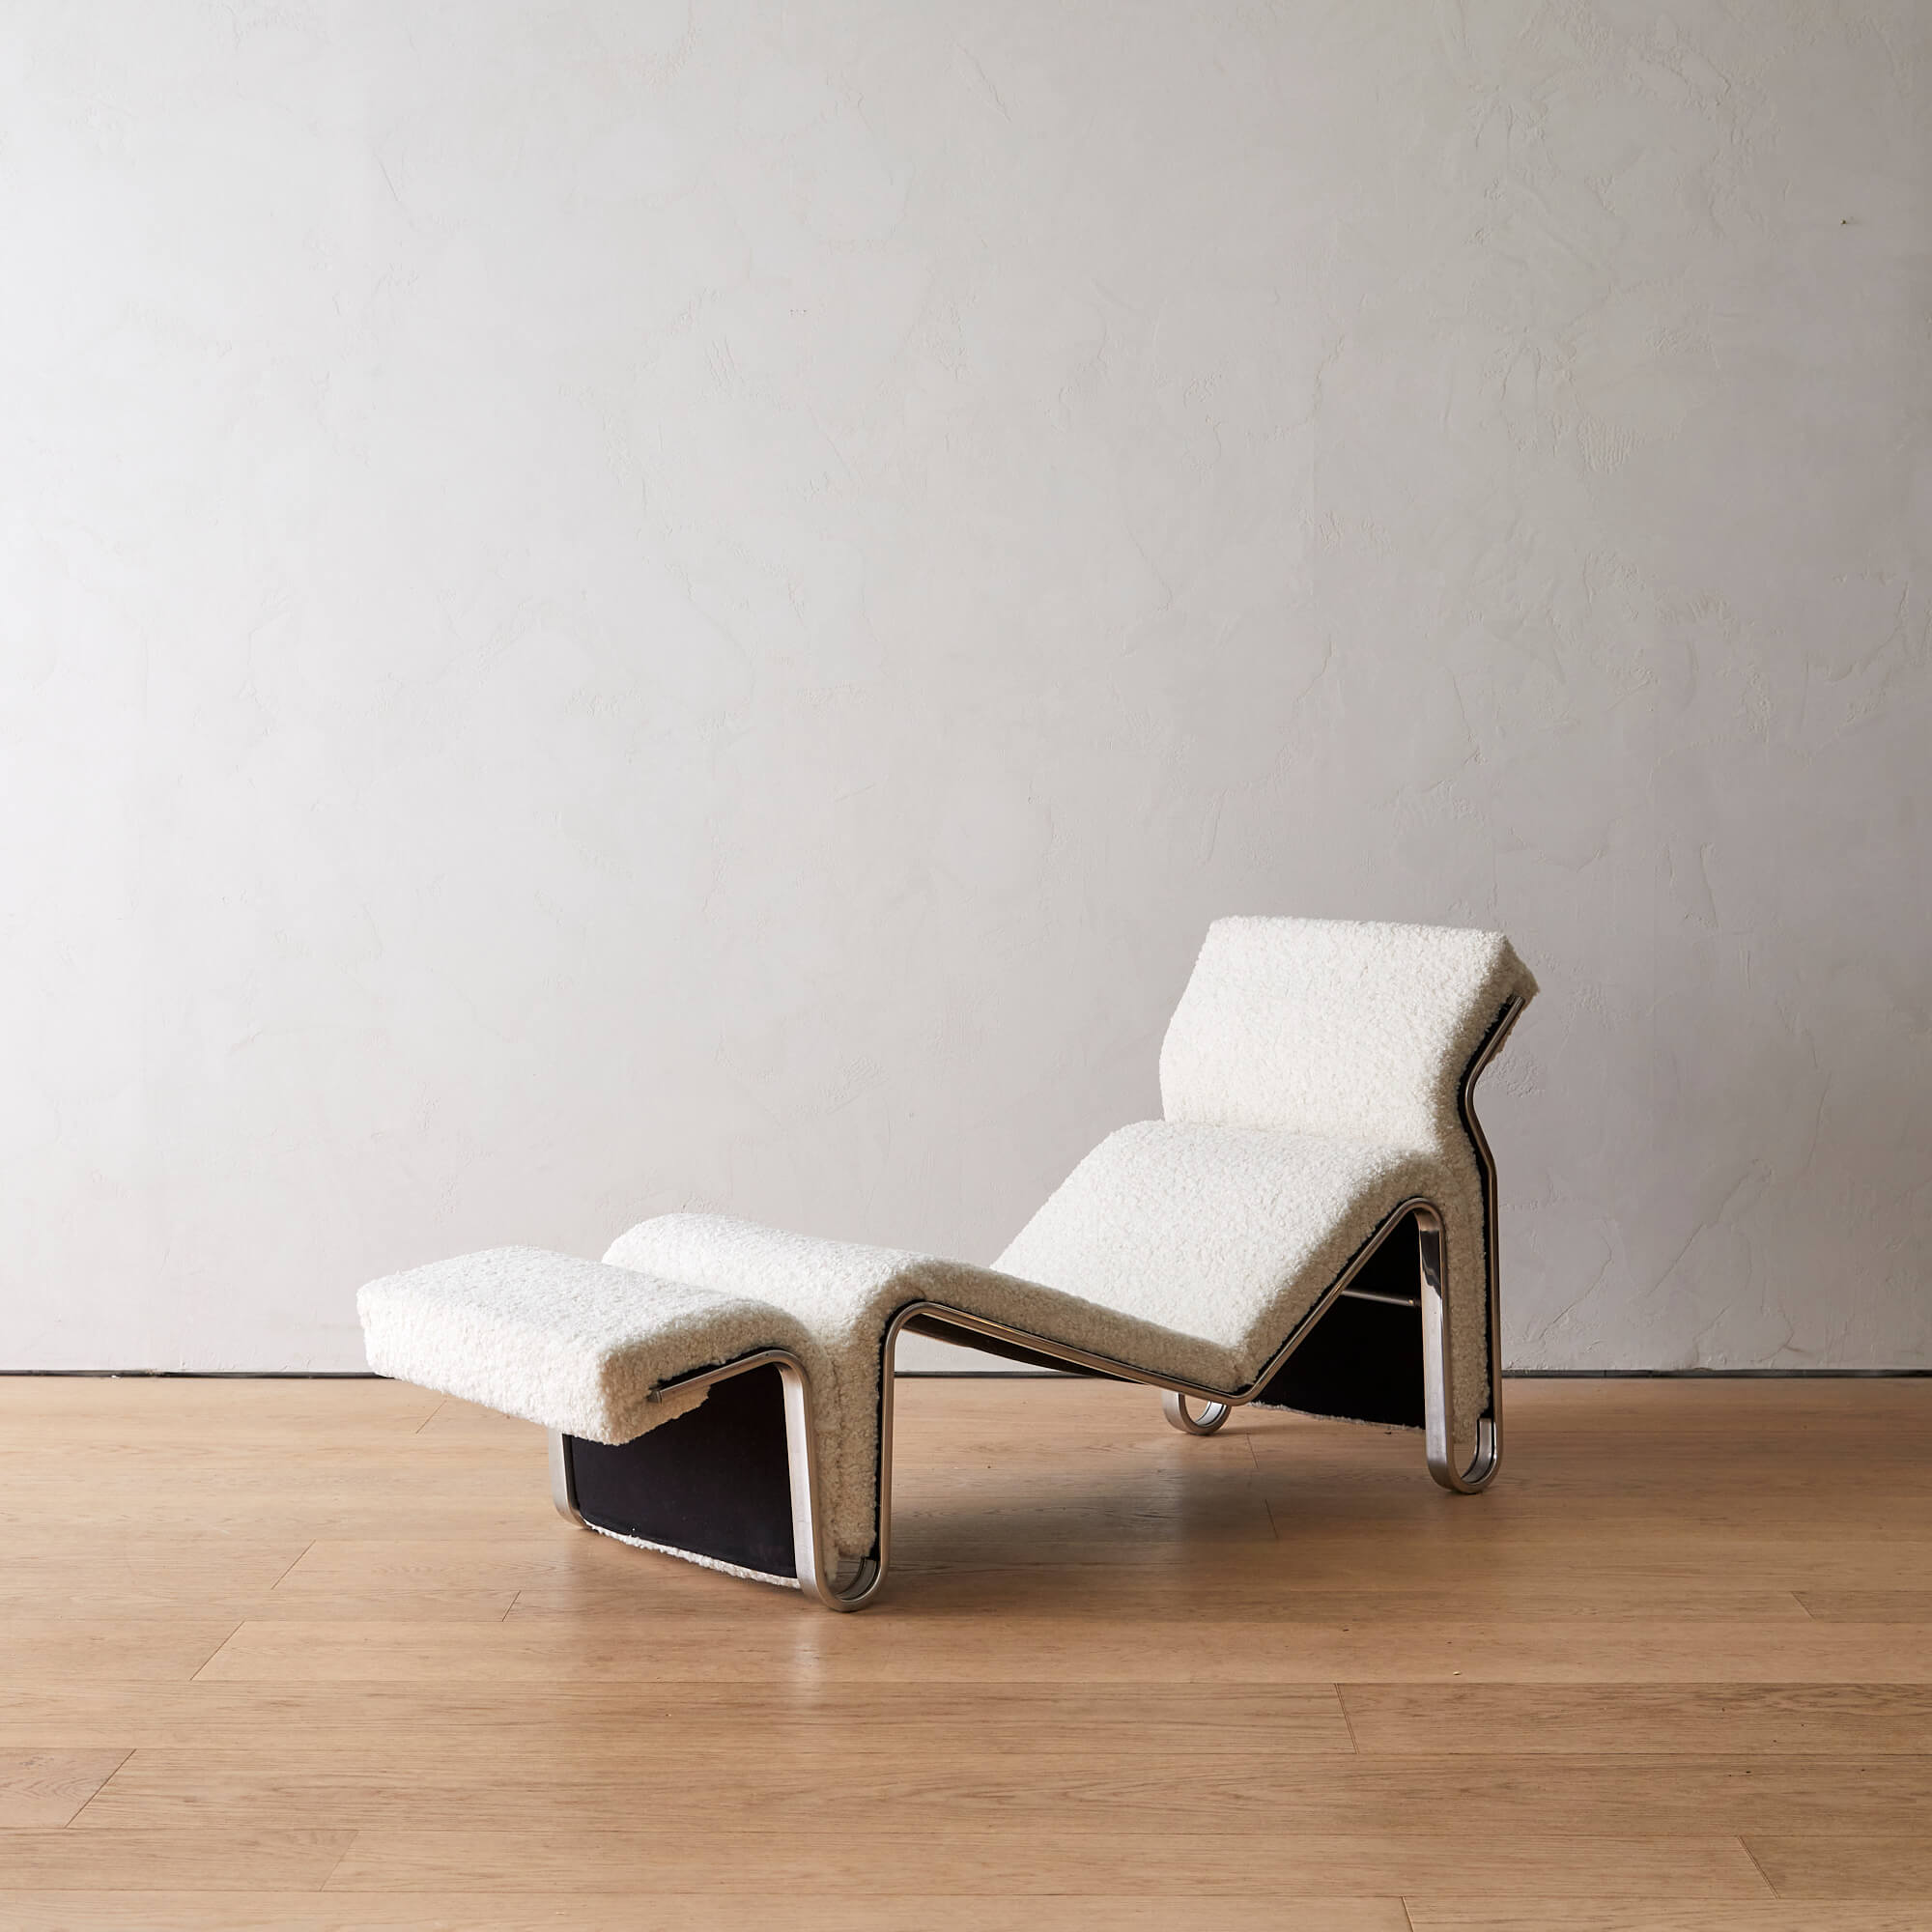 Lysmasken Lounger by Eric Sigfrid Persson